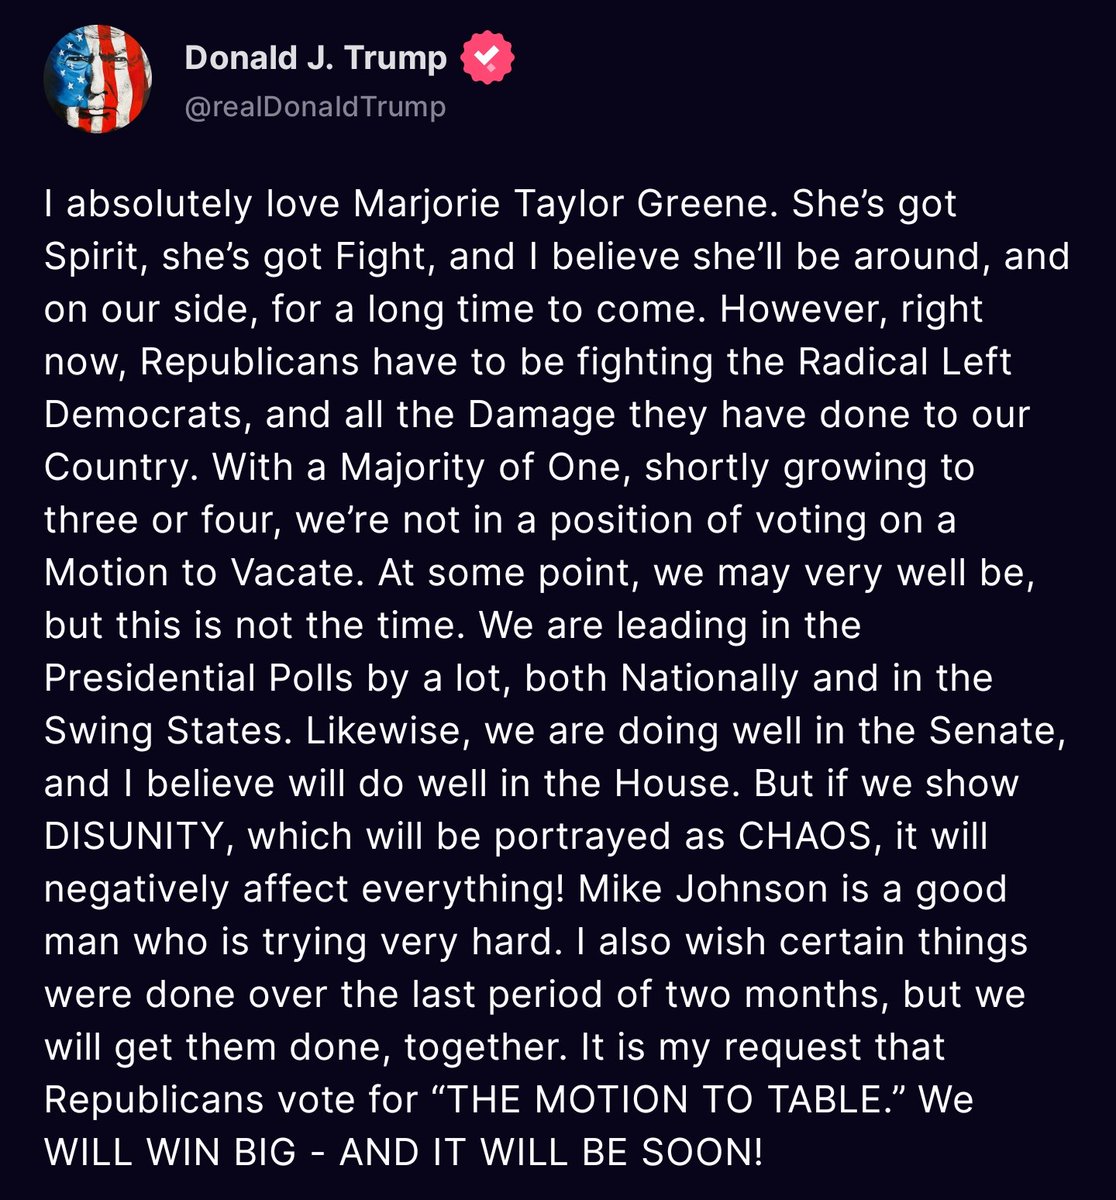 💥💥💥BOOOOOM TIME💥💥💥
We WILL WIN BIG - AND IT WILL BE SOON!
🦅🇺🇸A Message from Our President🇺🇸🦅

I absolutely love Marjorie Taylor Greene. She’s got Spirit, she’s got Fight, and I believe she’ll be around, and on our side, for a long time to come. However, right now,…